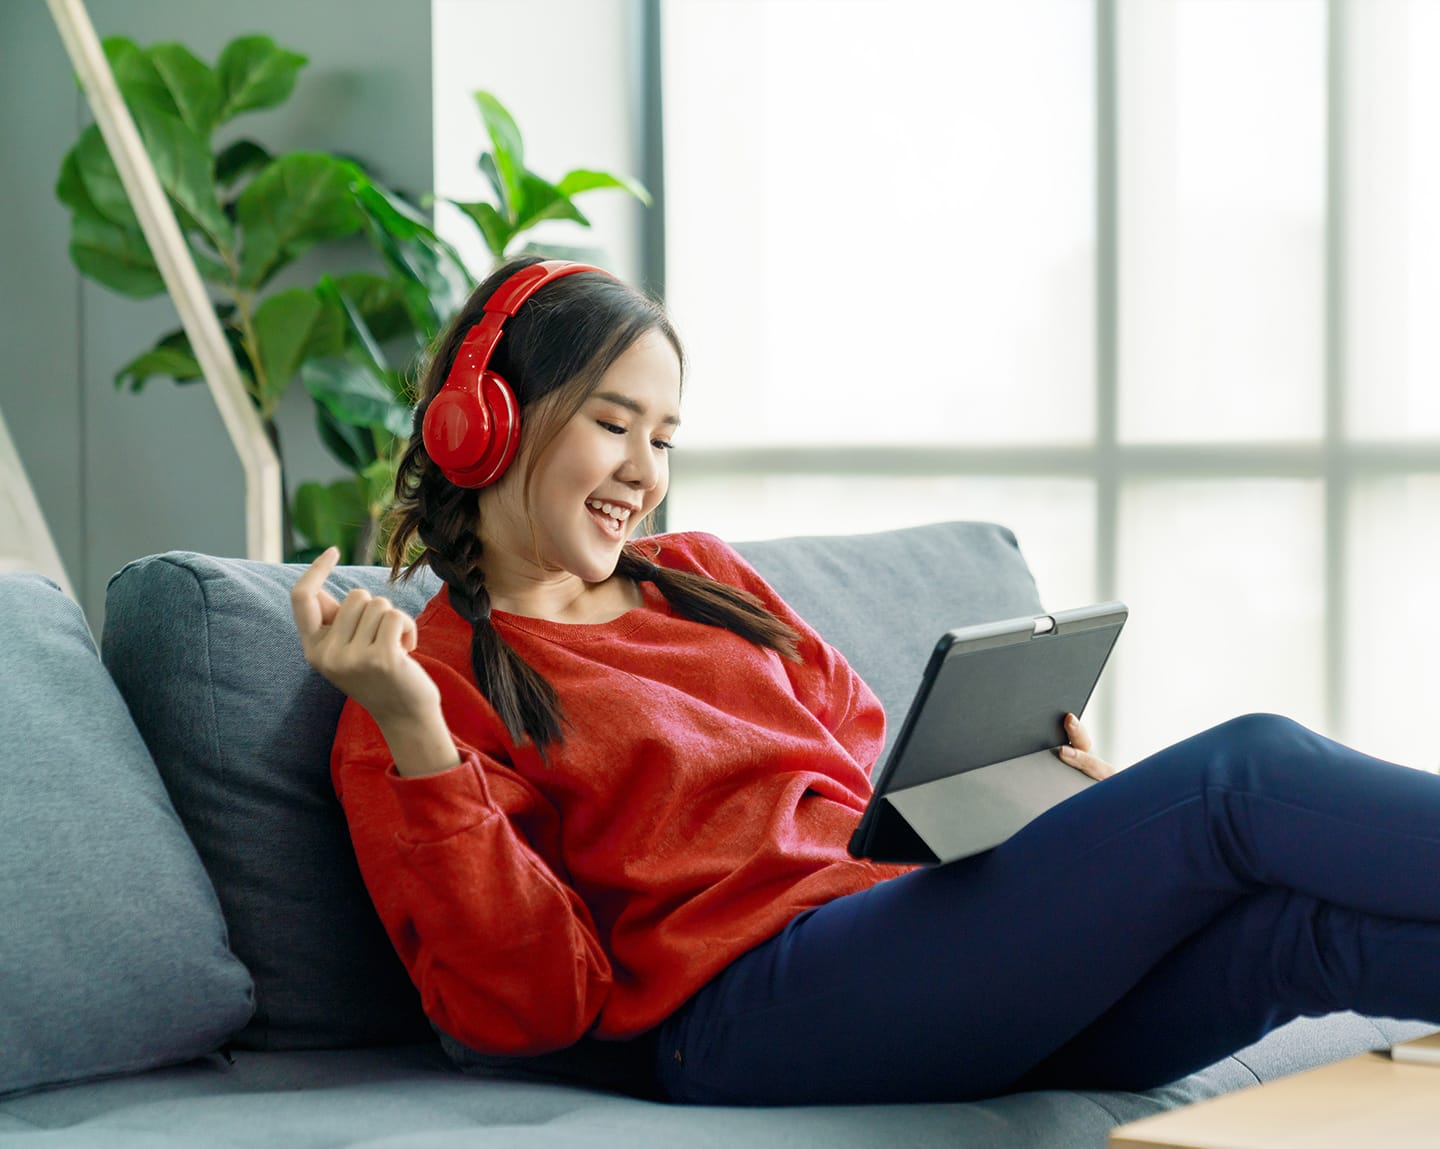 A woman wearing headphones and using a tablet